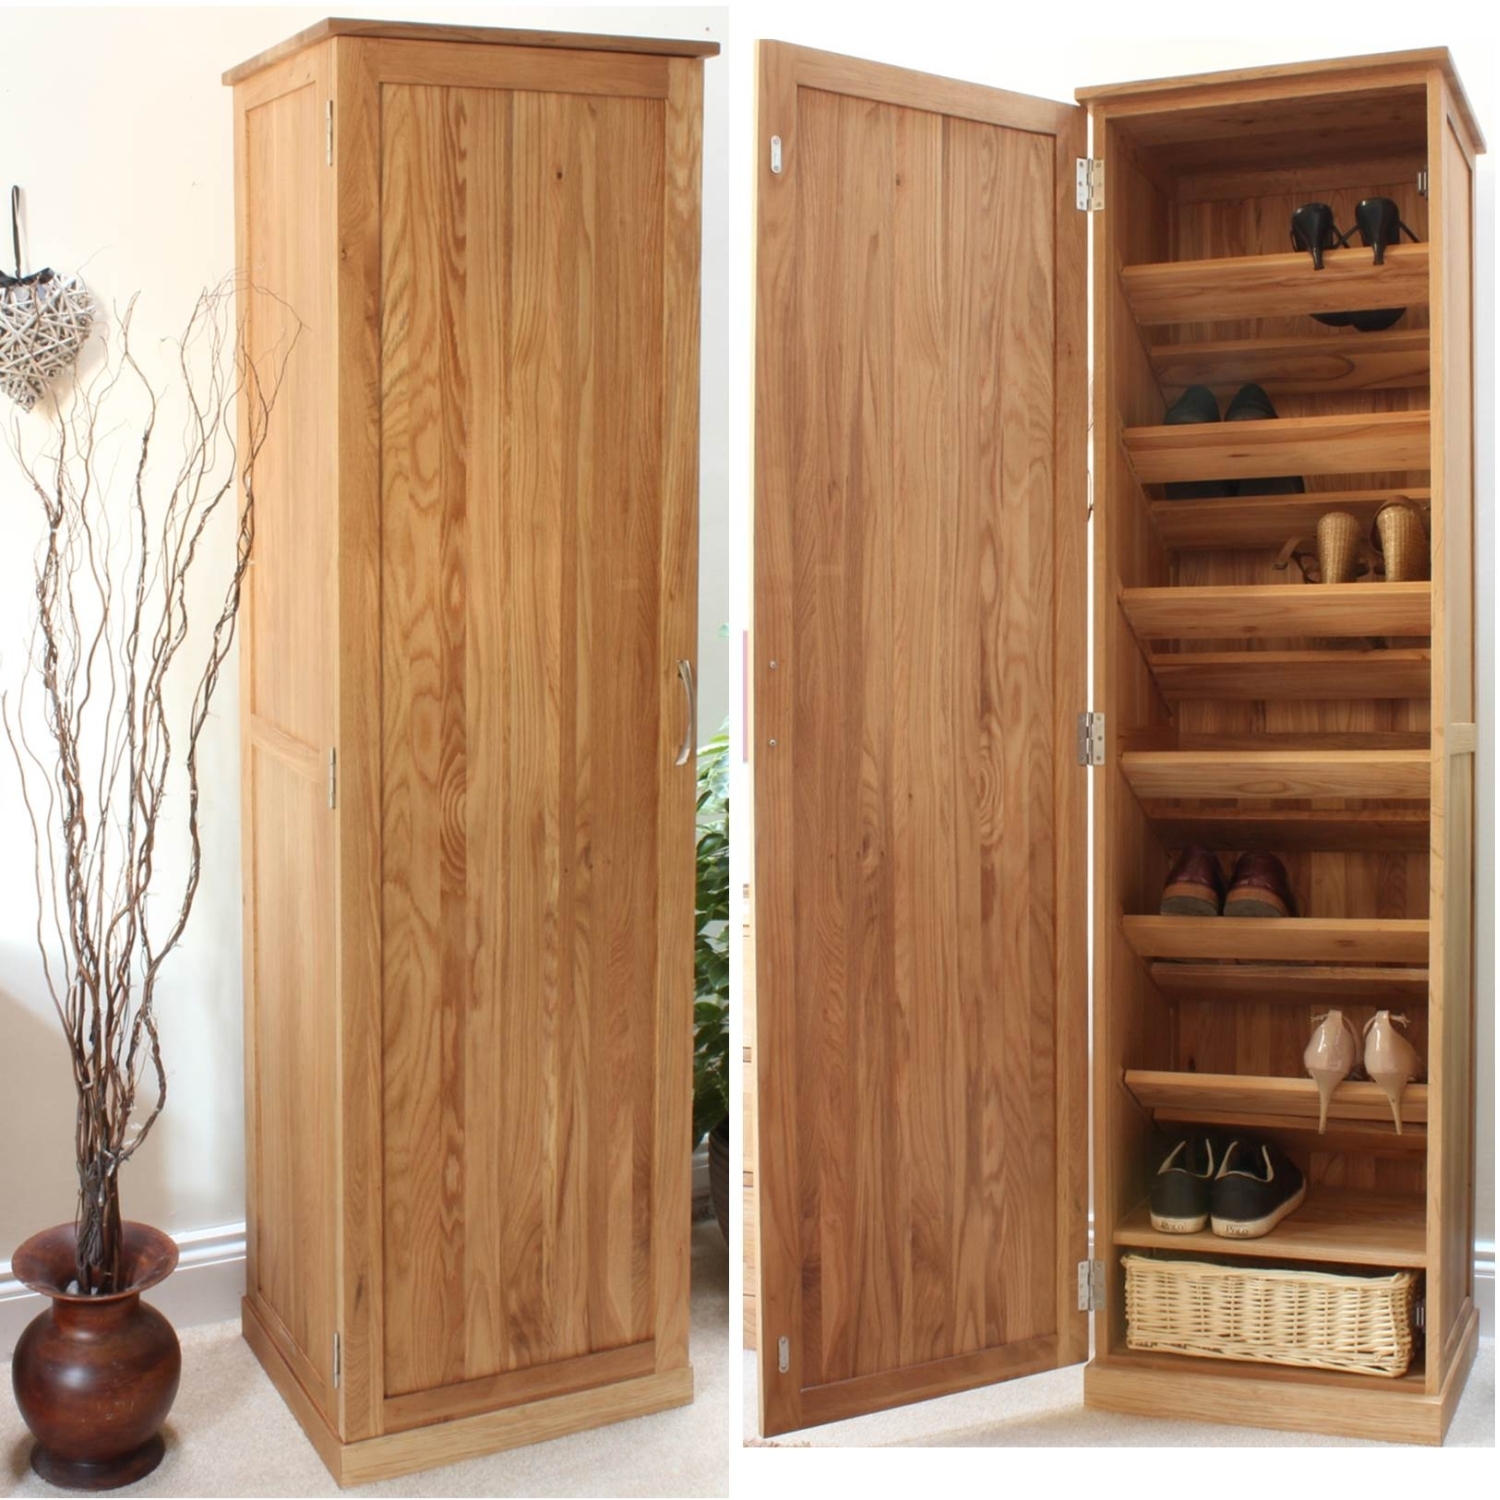 Storage Cabinets With Doors Visualhunt, Small Wooden Cabinet With Doors And Shelves